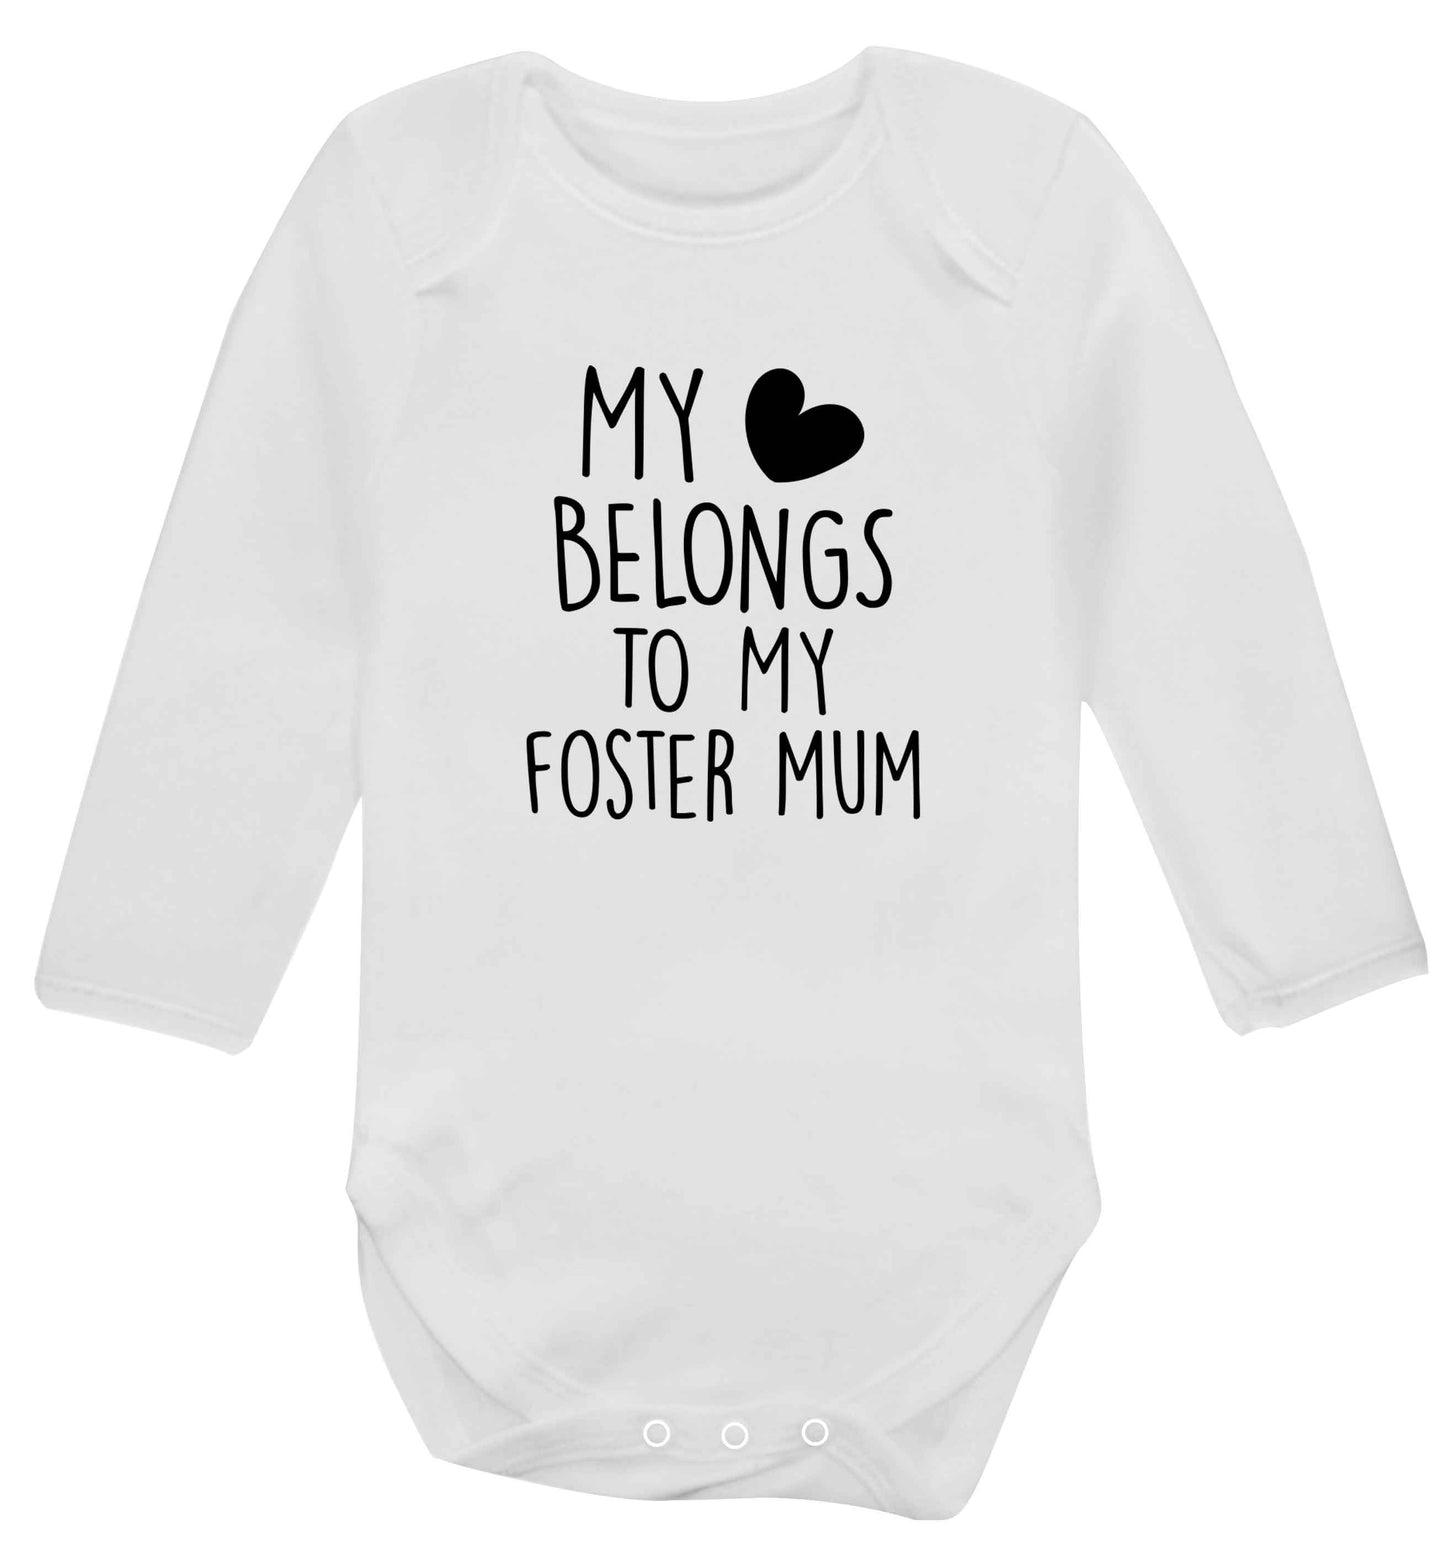 My heart belongs to my foster mum baby vest long sleeved white 6-12 months